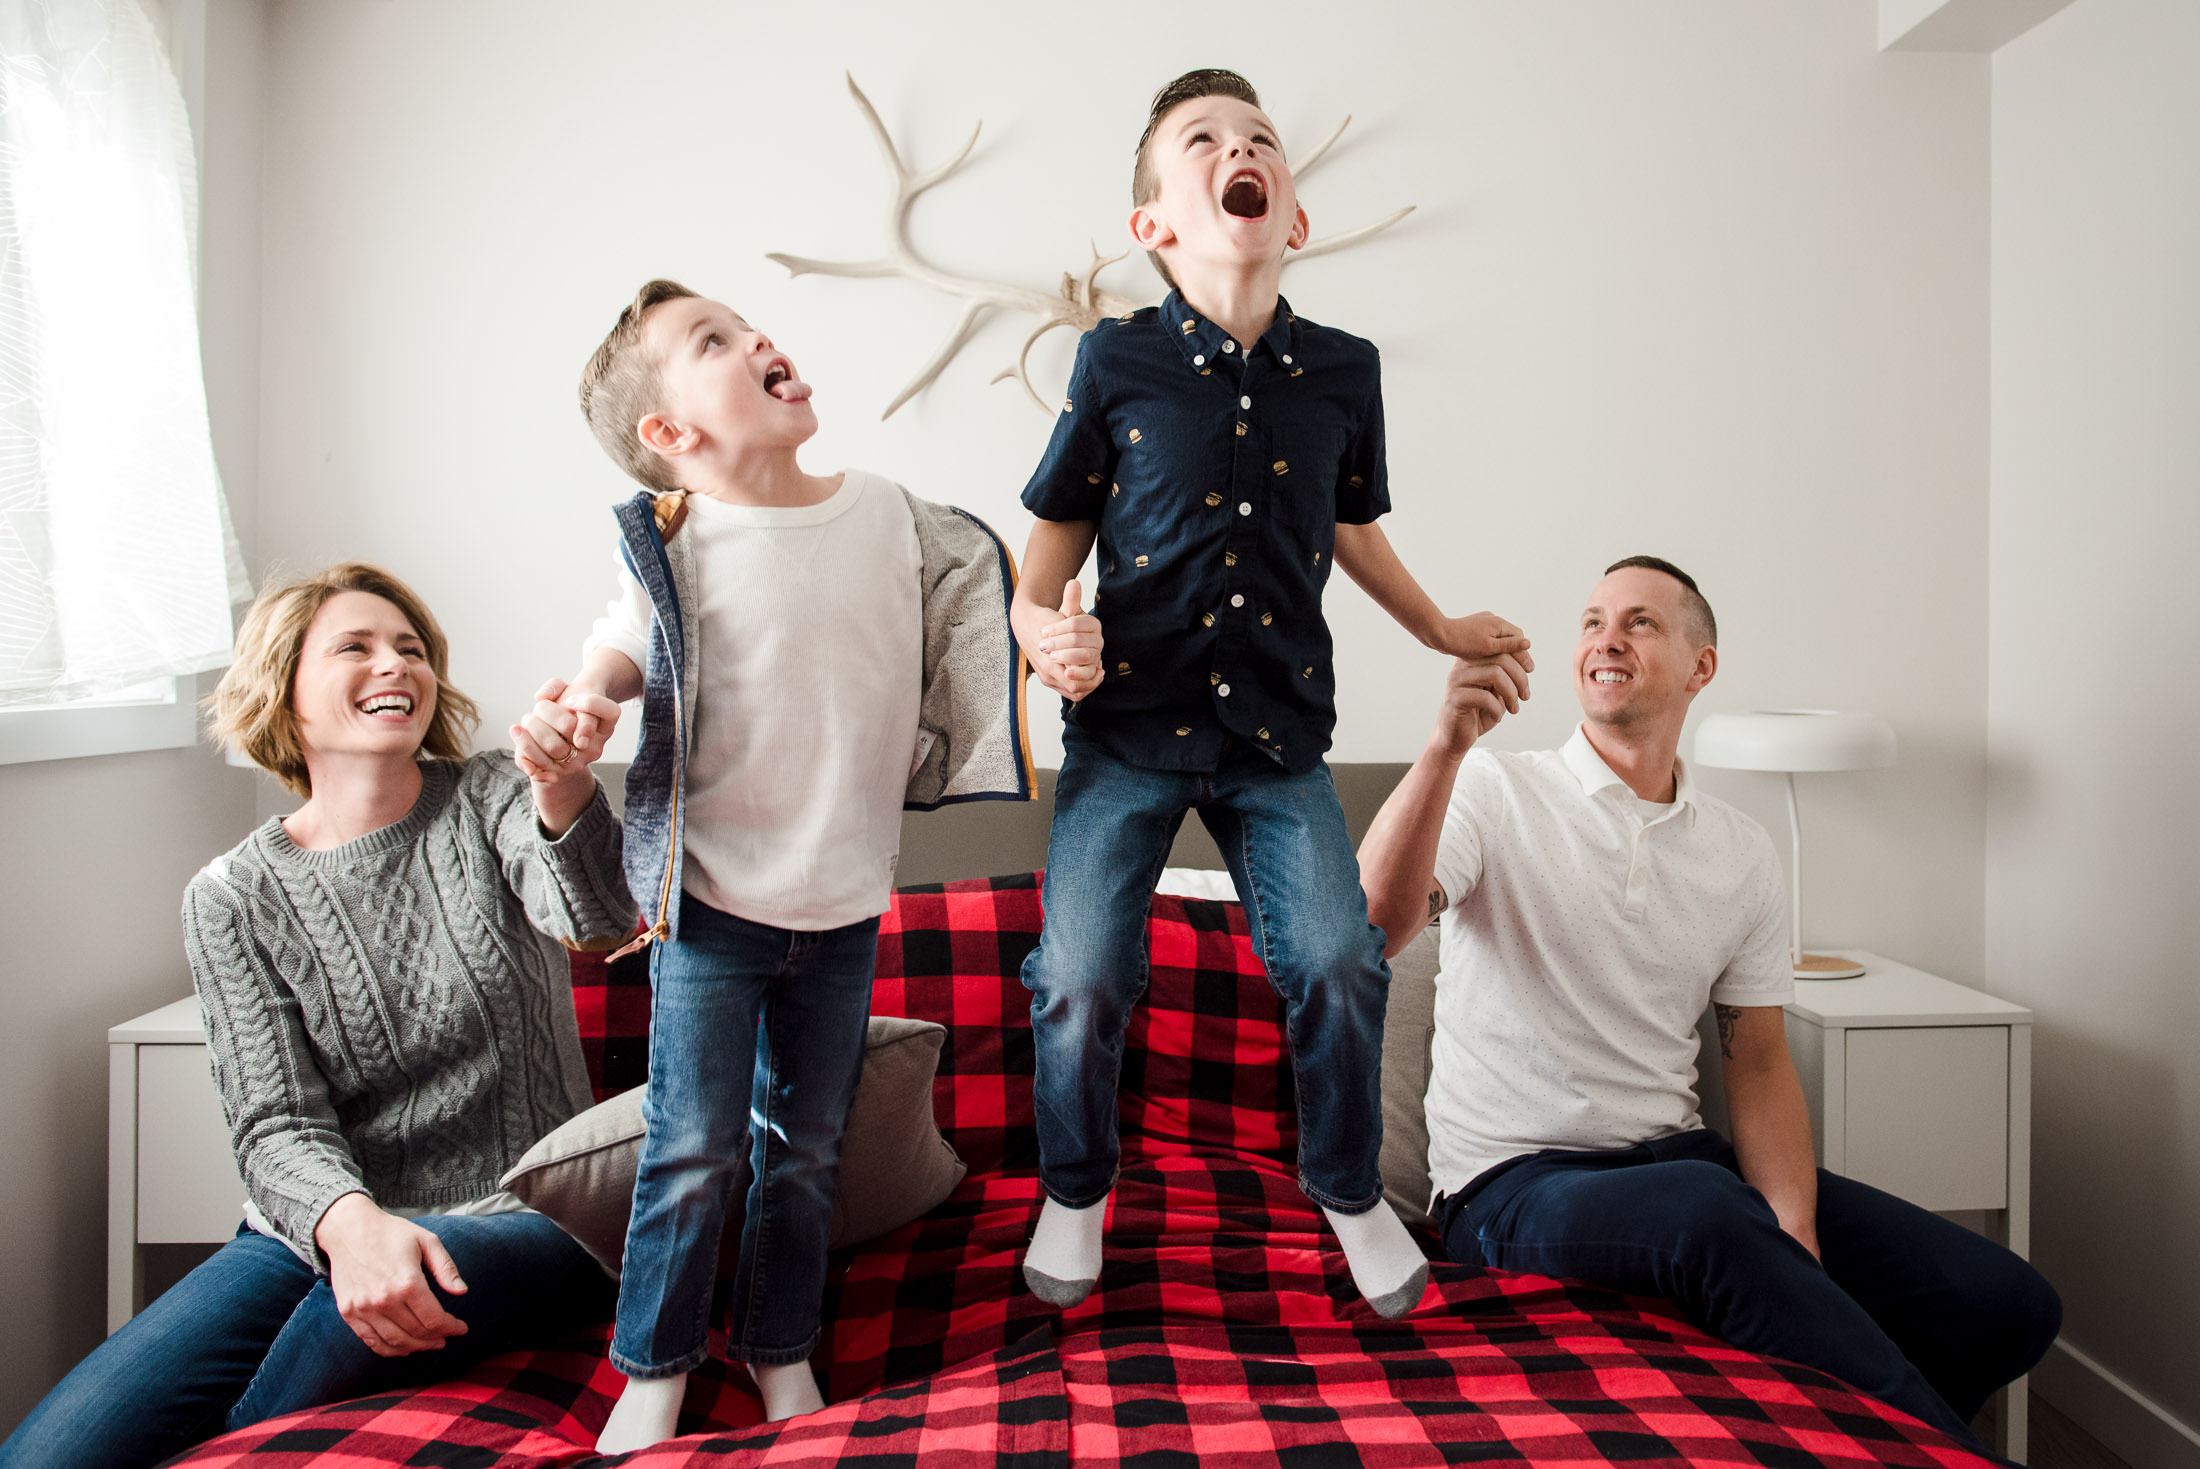 Kids jump on the bed during an Edmonton family photo session